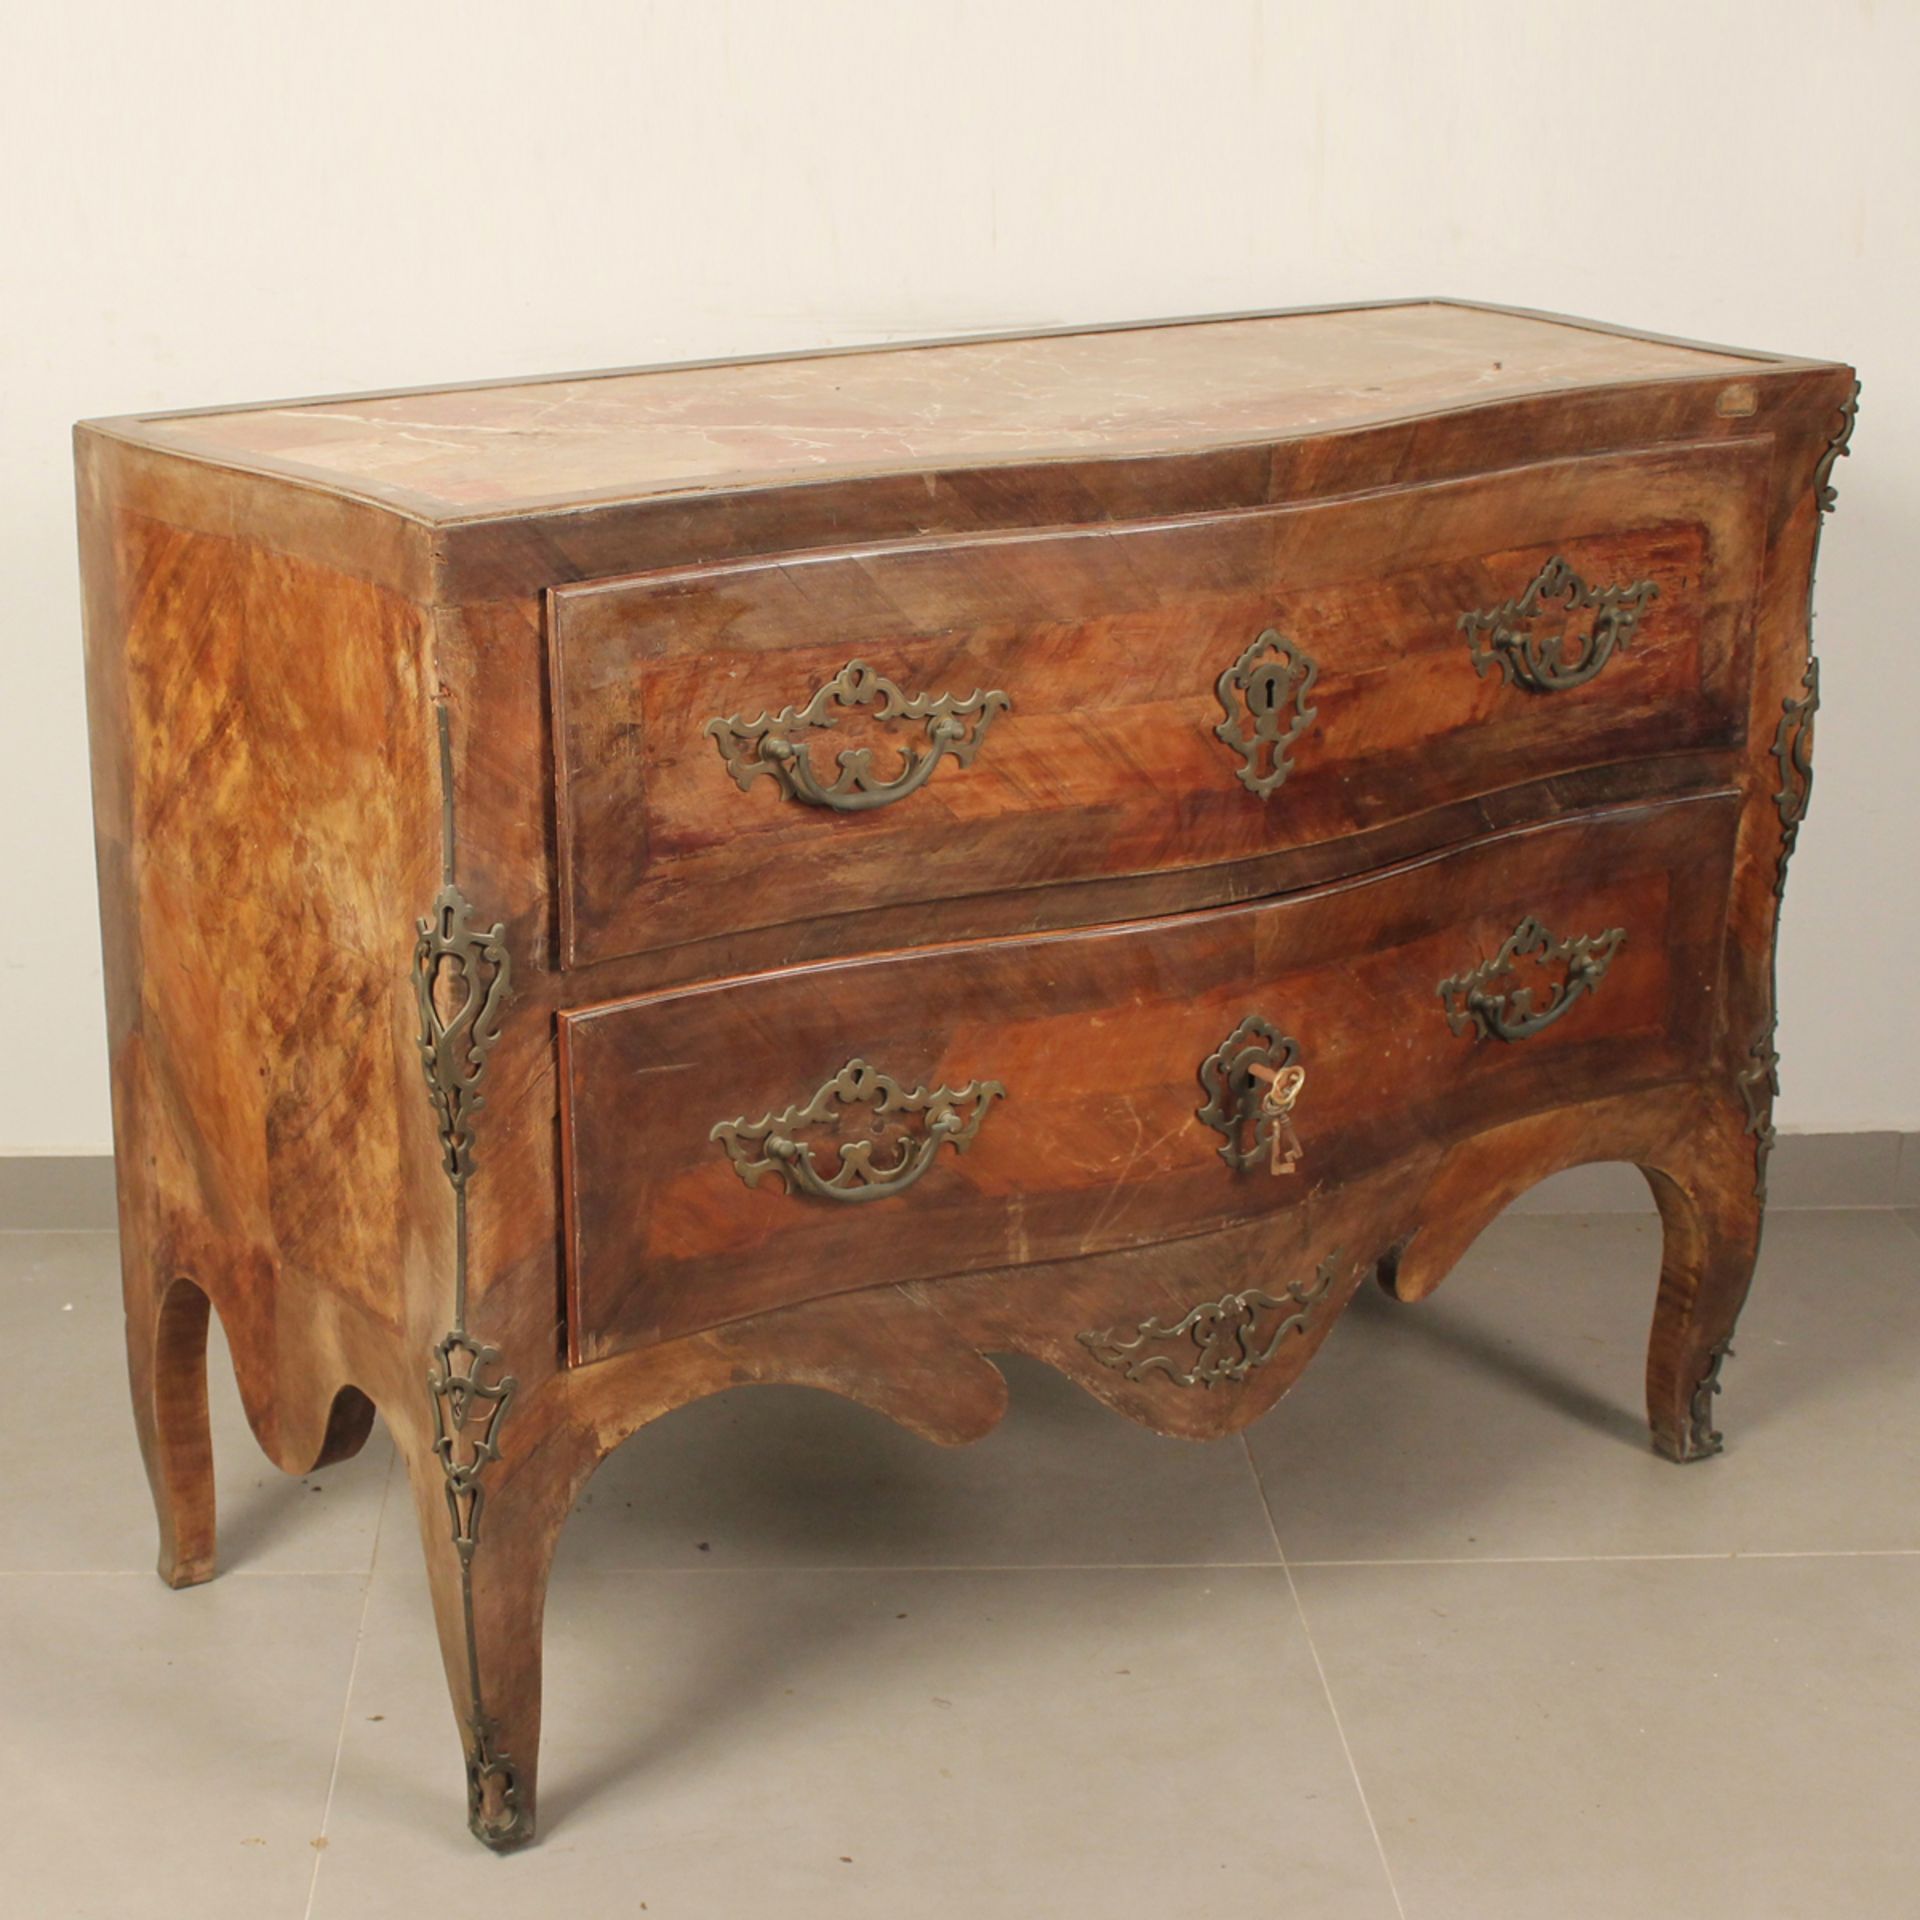 Cassettone a due cassetti - Commode with two drawers - Image 2 of 3